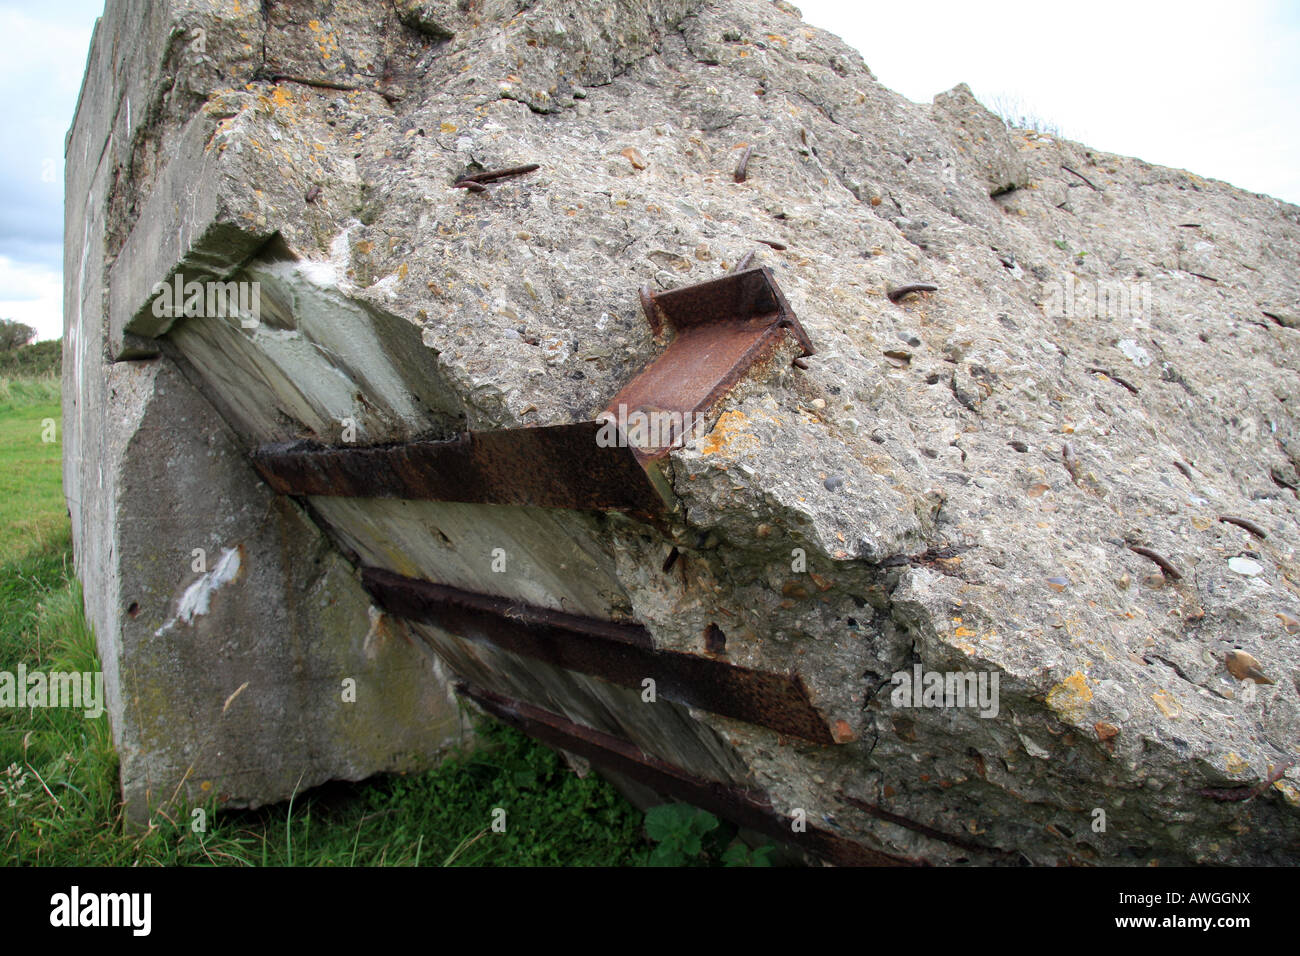 A roof section from a reinforced concrete gun emplacement Pointe du Hoc, France. Stock Photo